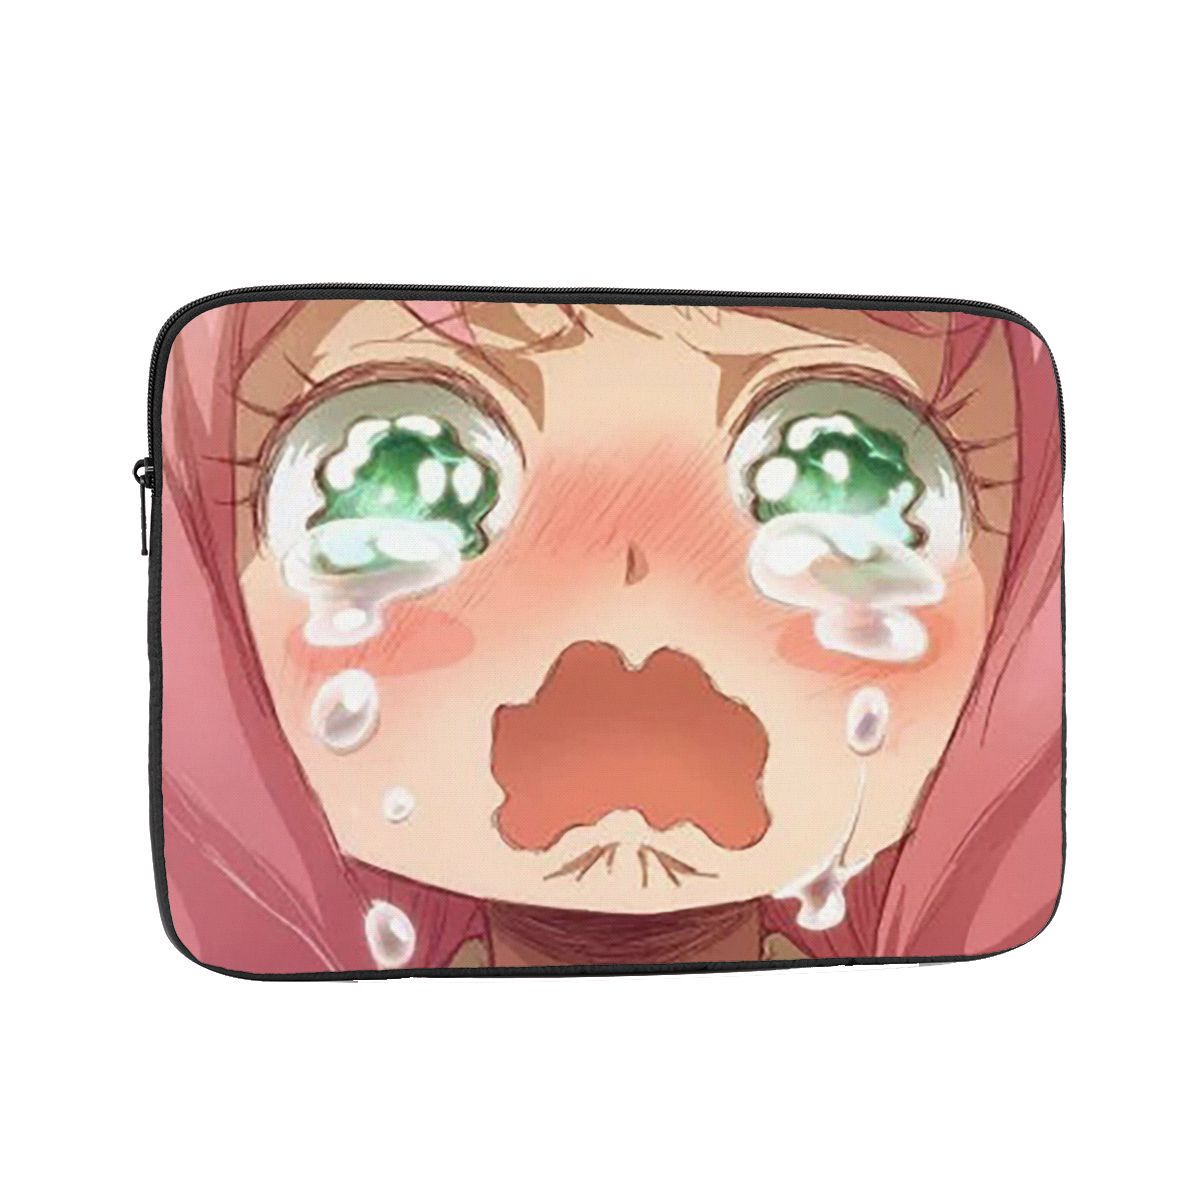 Ensure your devices are protected at all times| If you are looking for more Spy X Family Merch, We have it all! | Check out all our Anime Merch now!